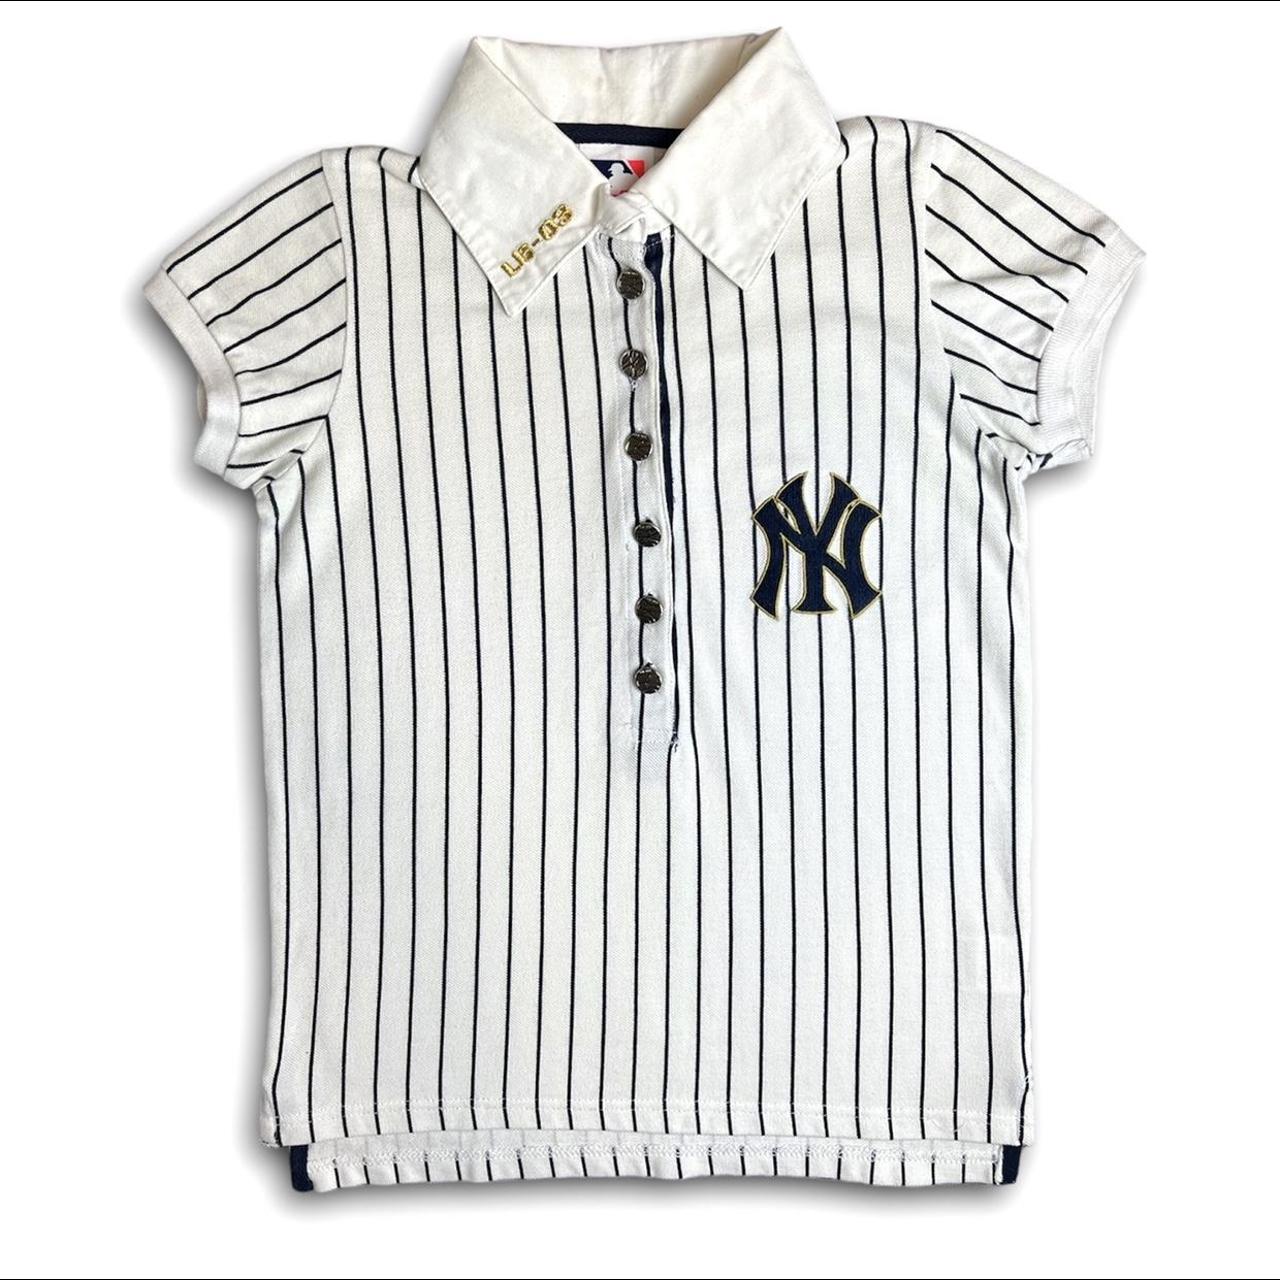 LB-03 MLB NY Yankees Polo Top By Japanese brand - Depop